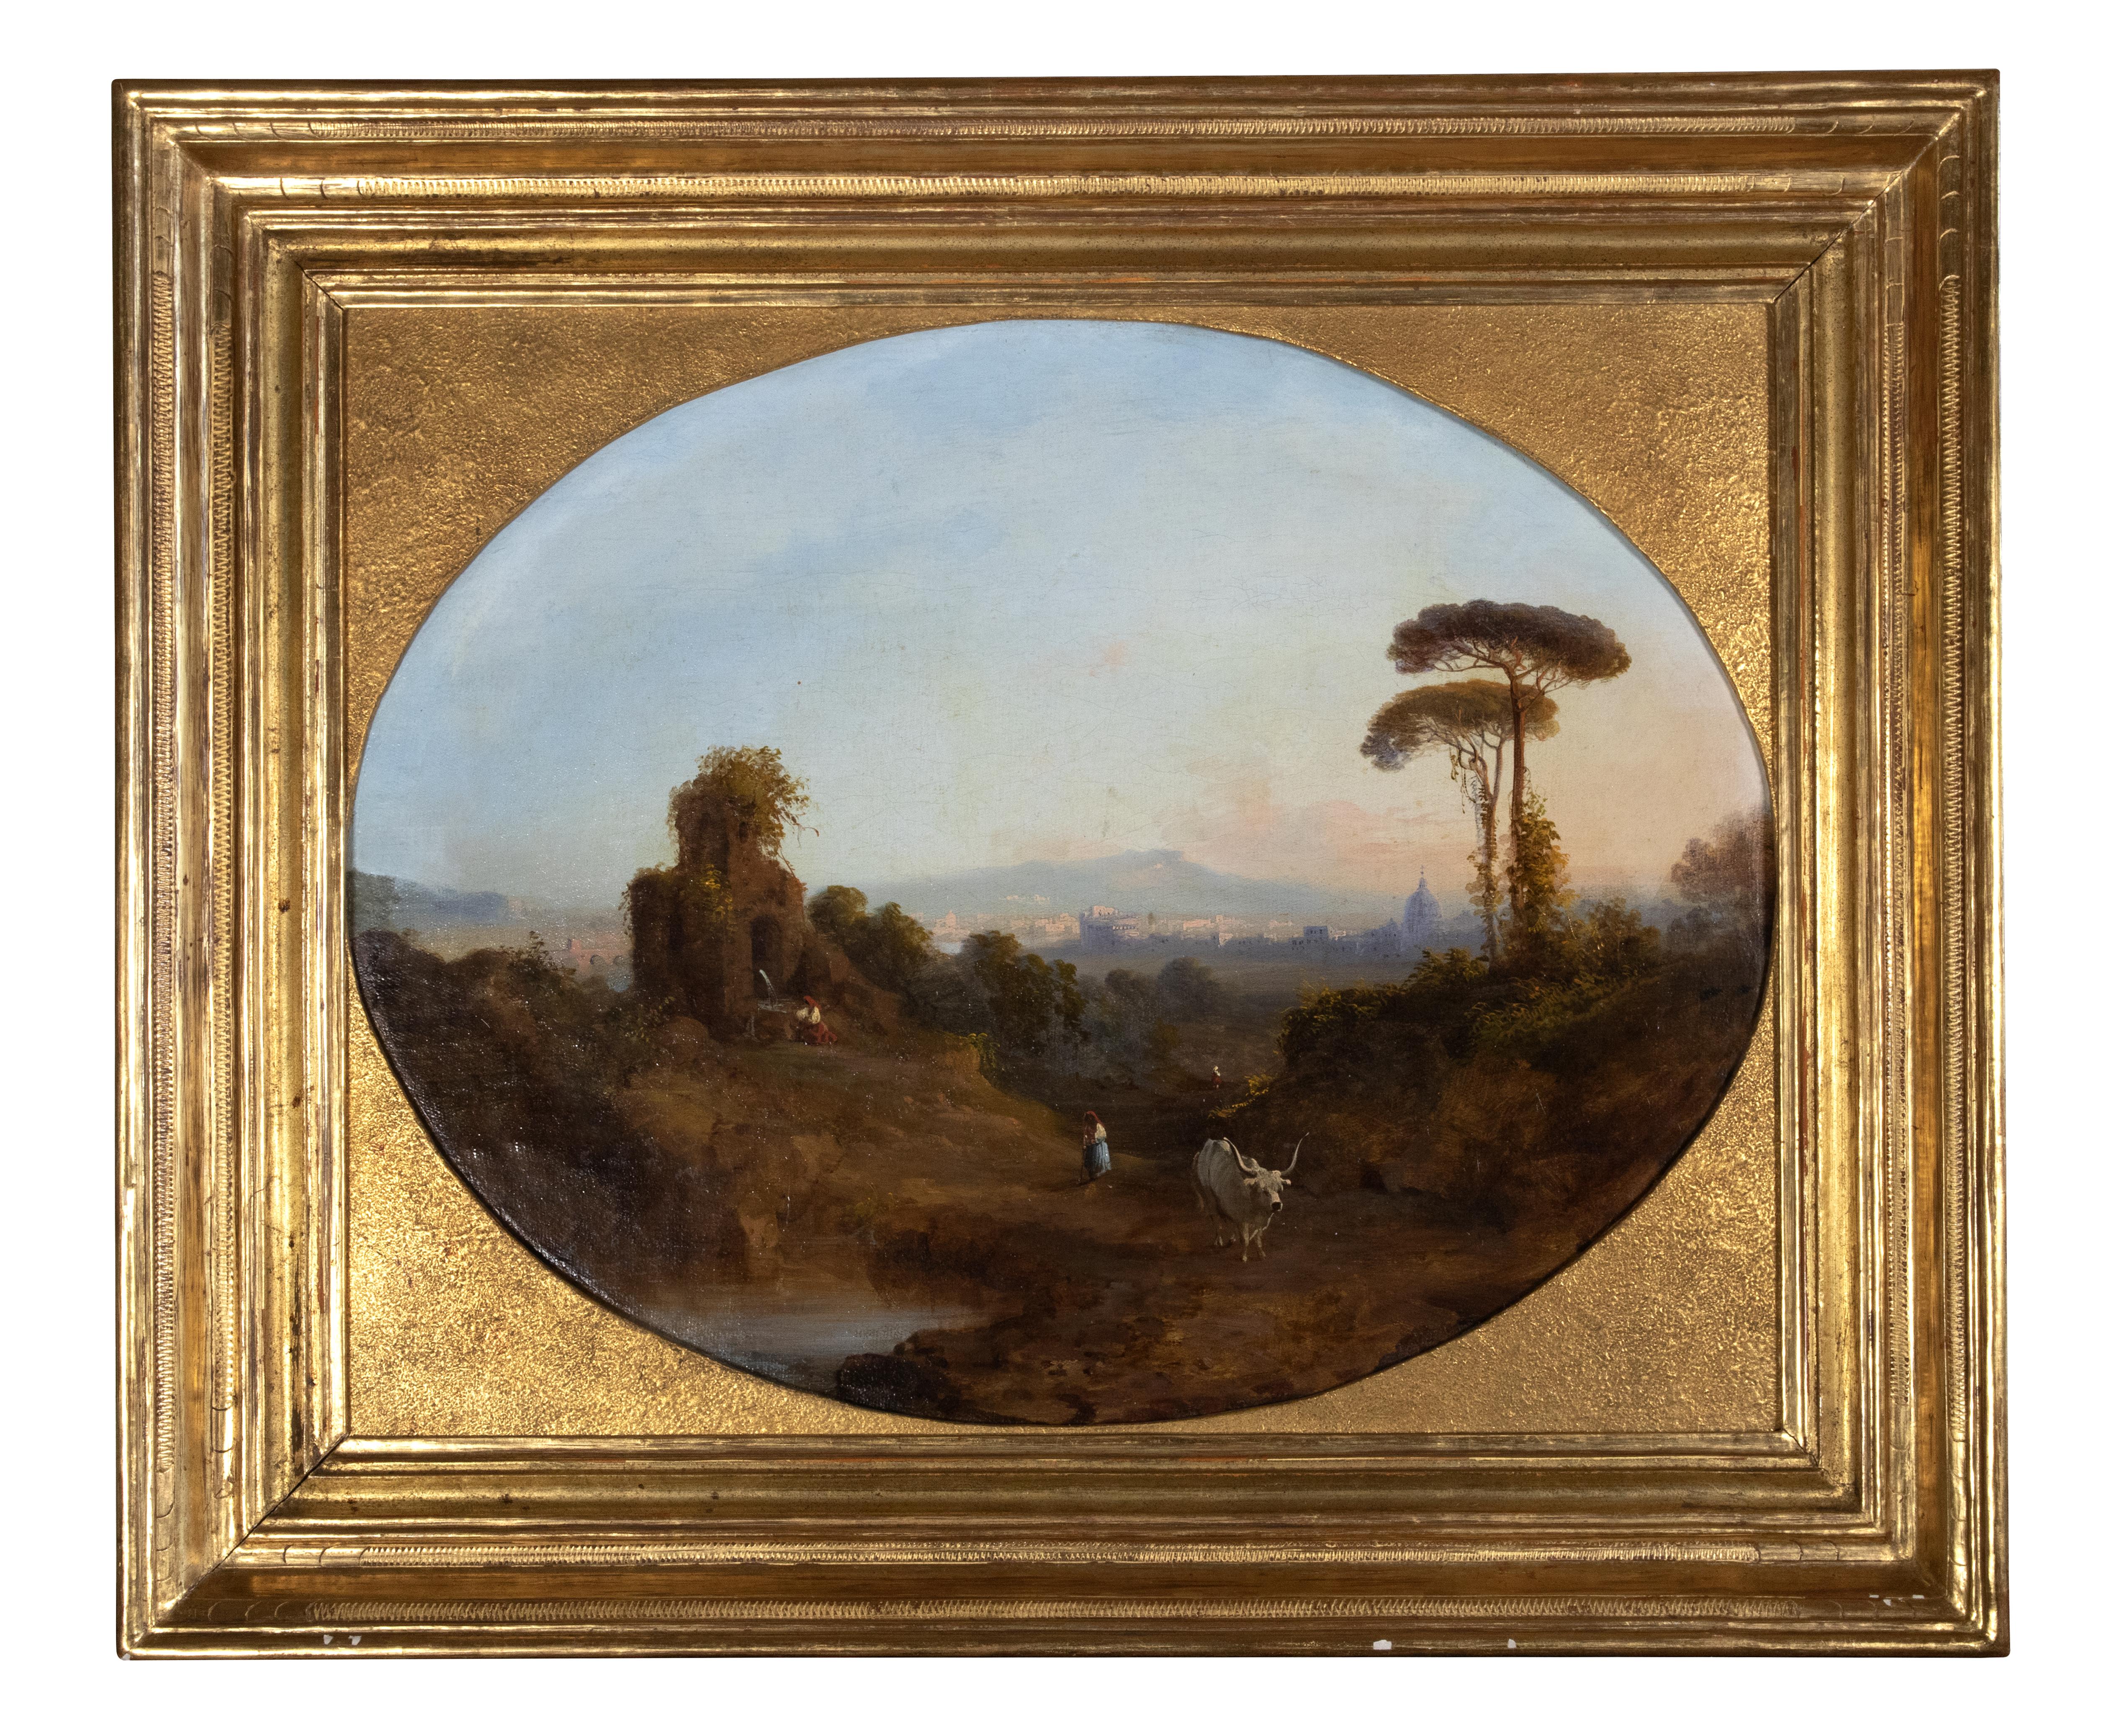 Pair of Landscapes with Views of Ancient Rome - Oil on Canvas - Mid 19th century - Modern Painting by Unknown